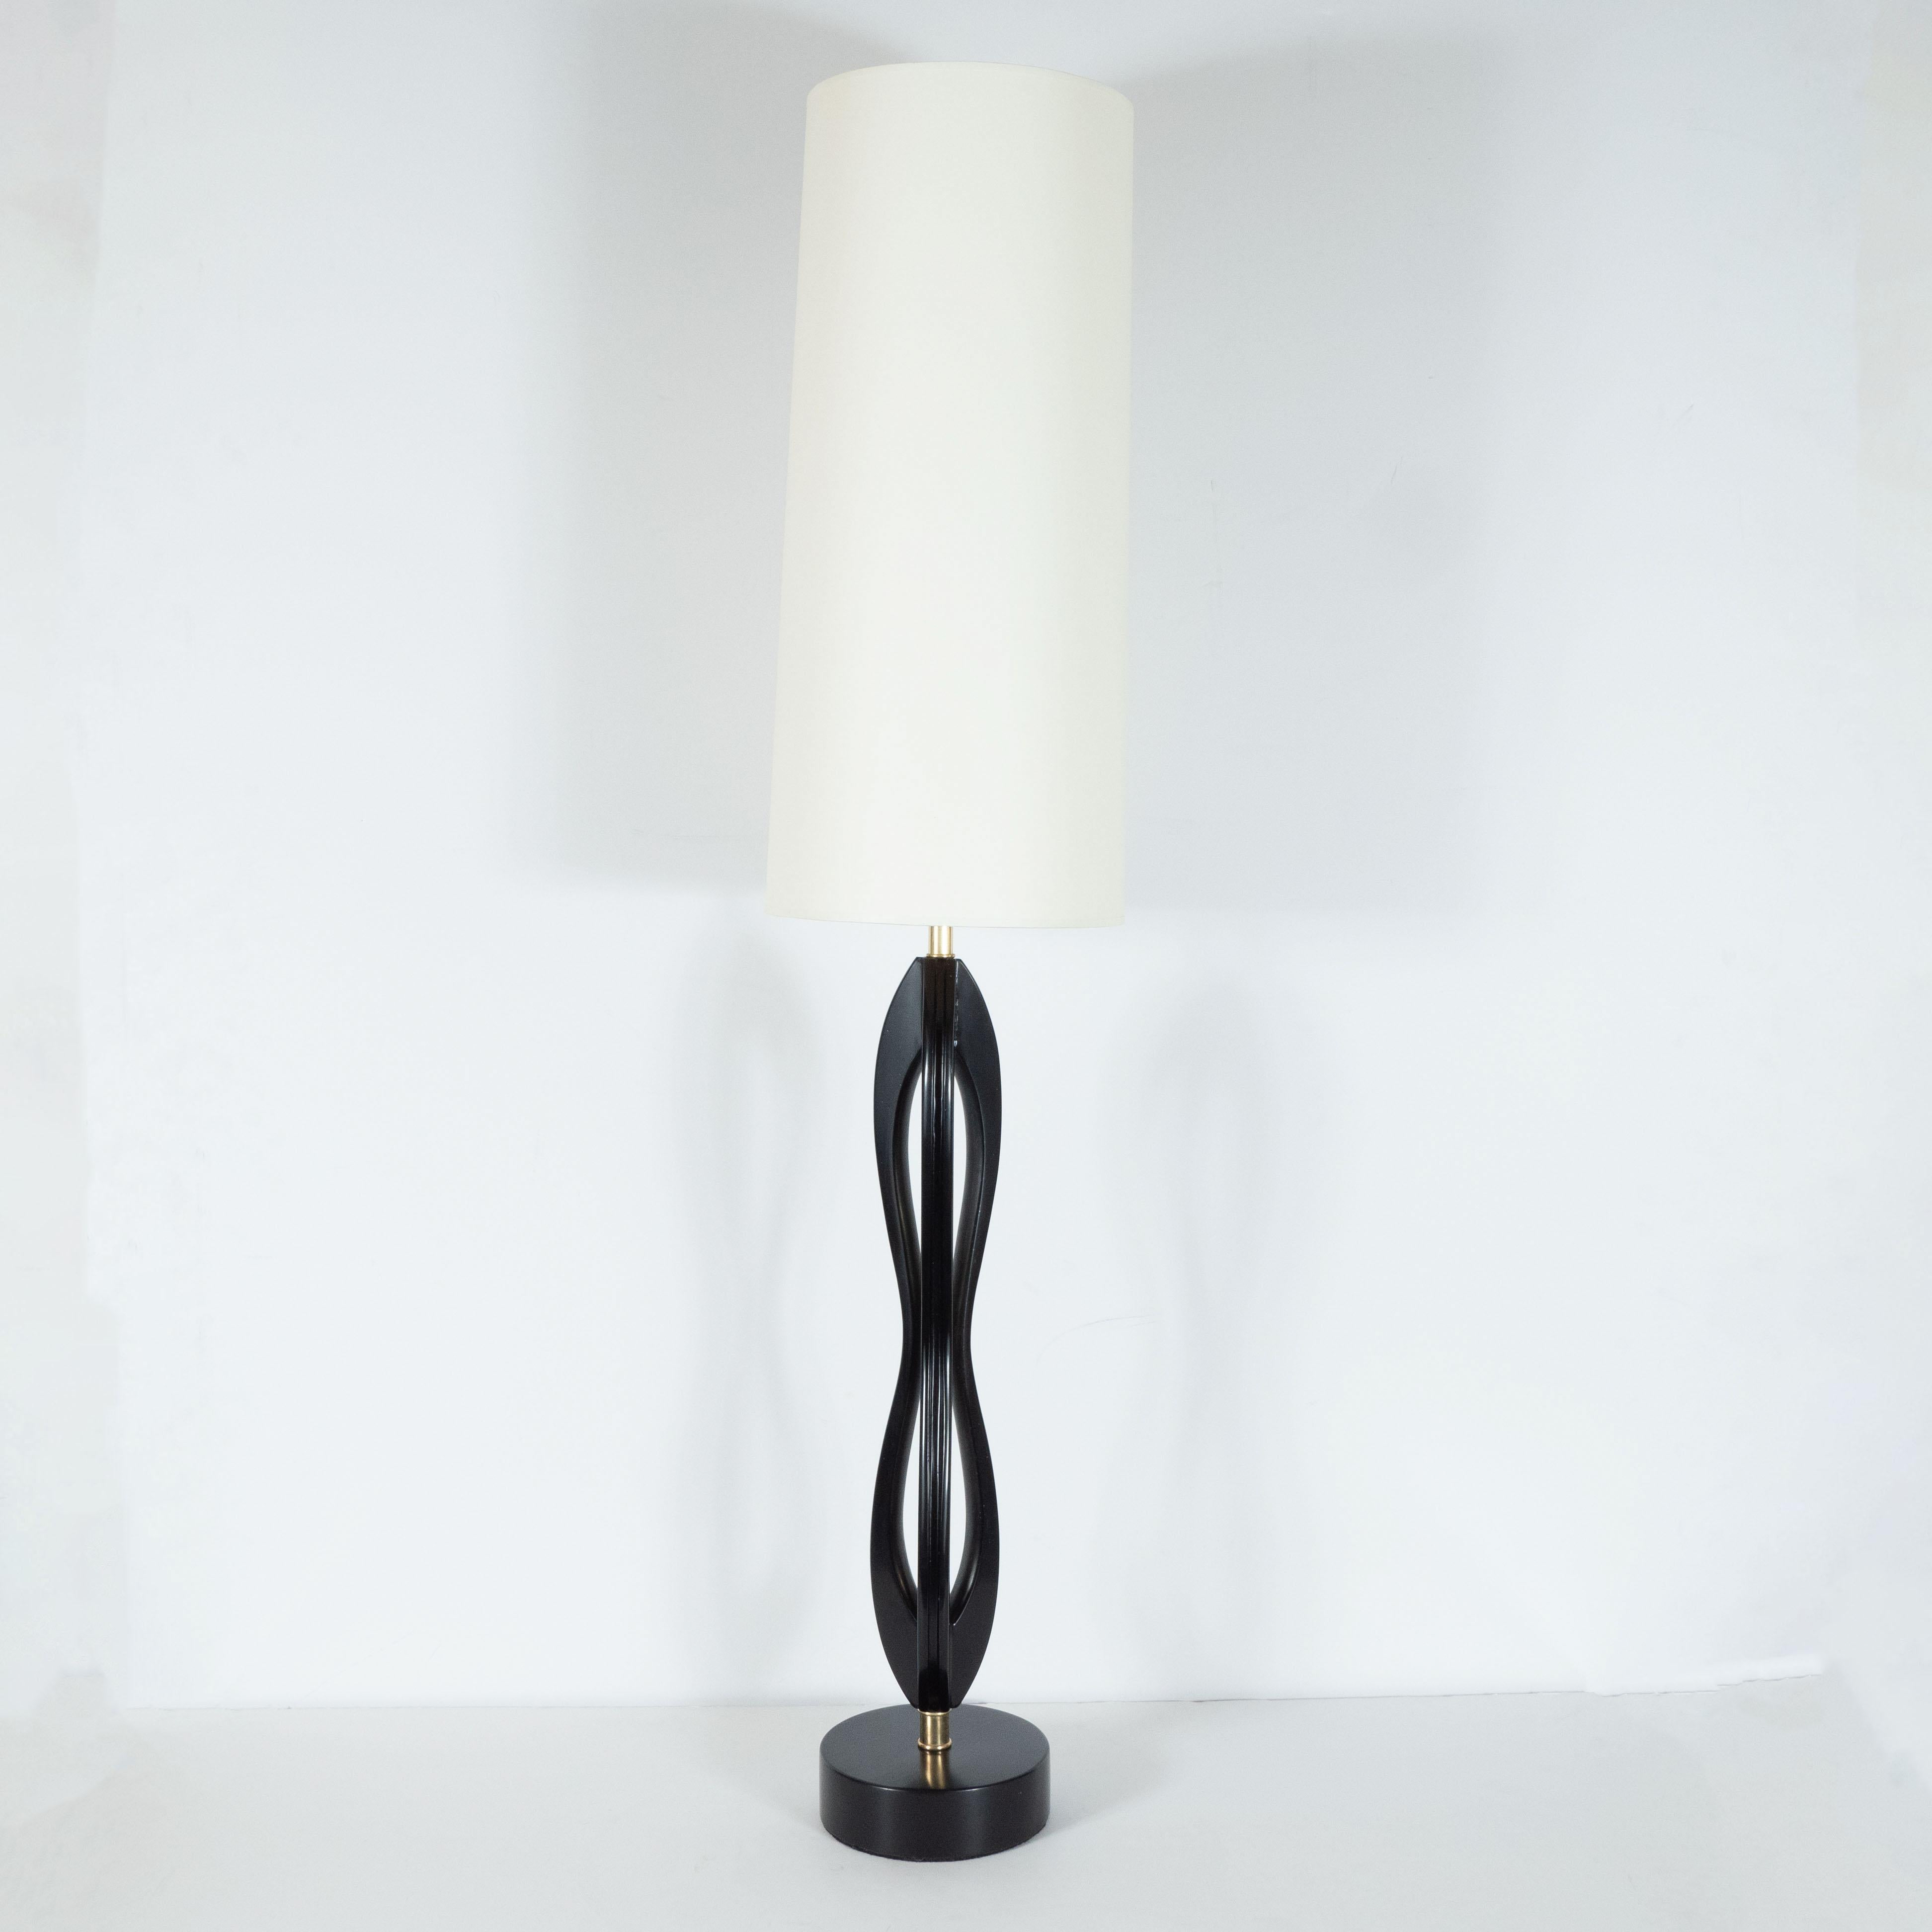 American Pair of Mid-Century Modern Sculptural Ebonized Walnut and Brass Table Lamps